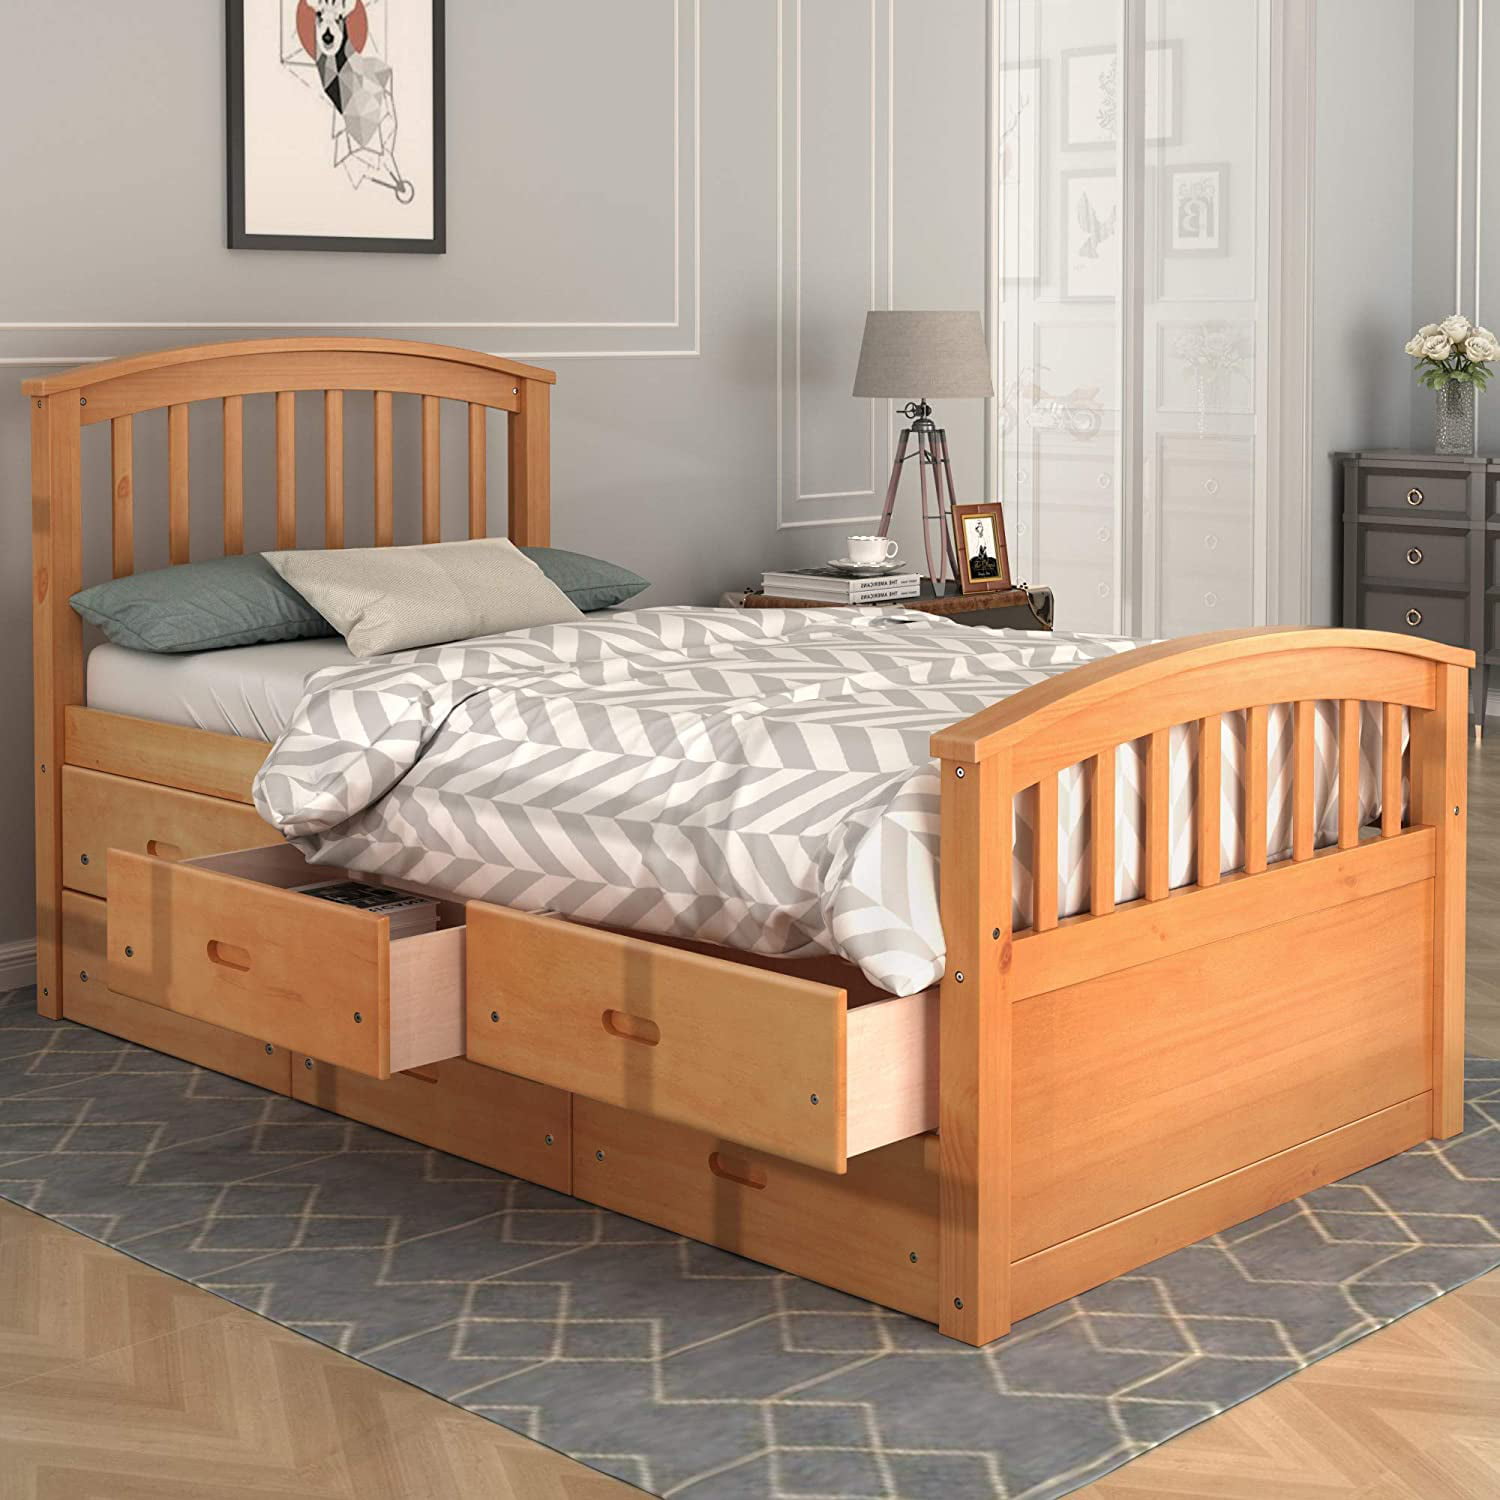 full size bed with storage drawers underneath